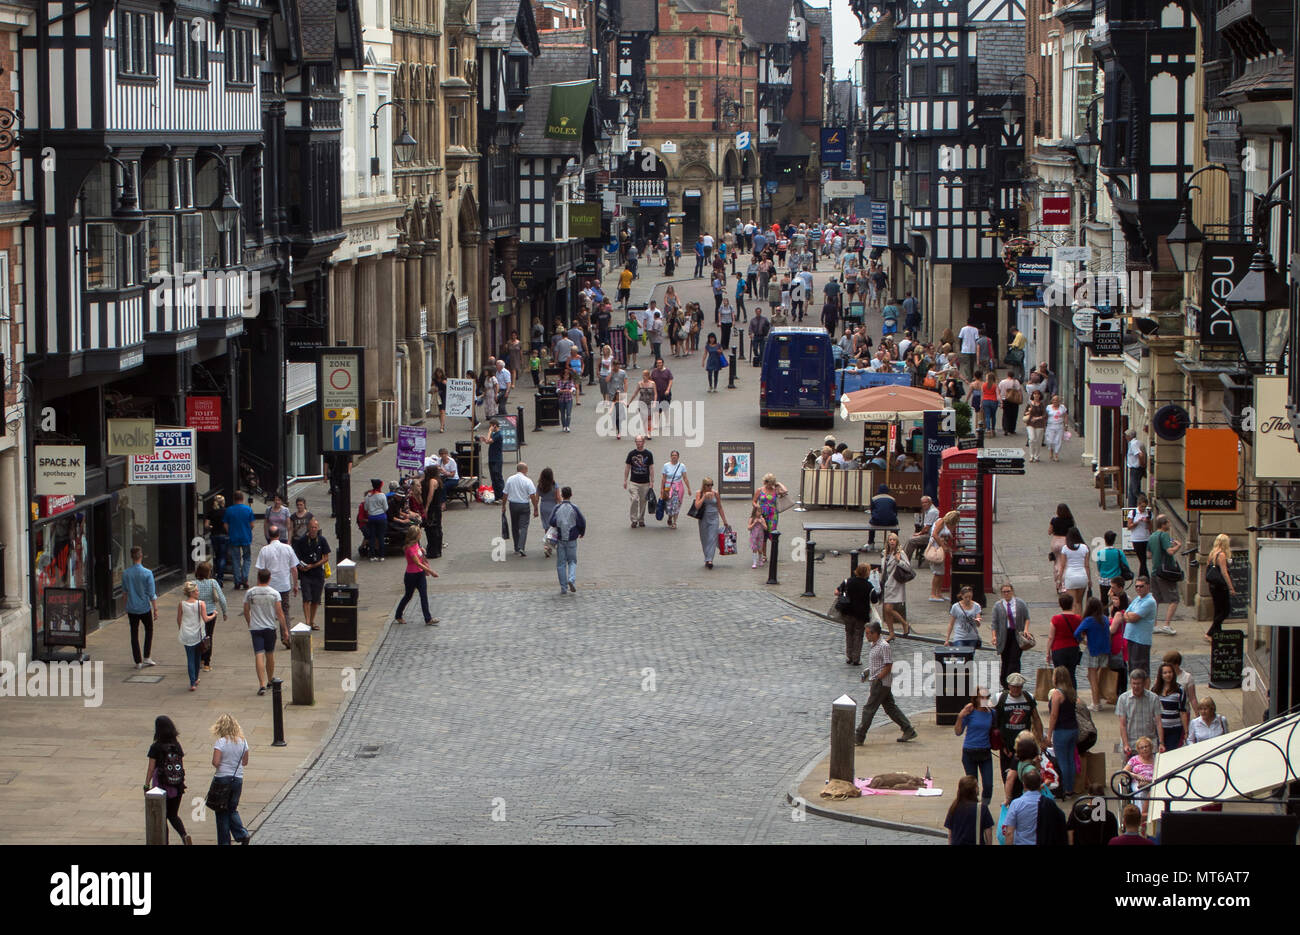 Crowded Eastgate street seen from the Eastgate clock in Chester, England, UK. Stock Photo